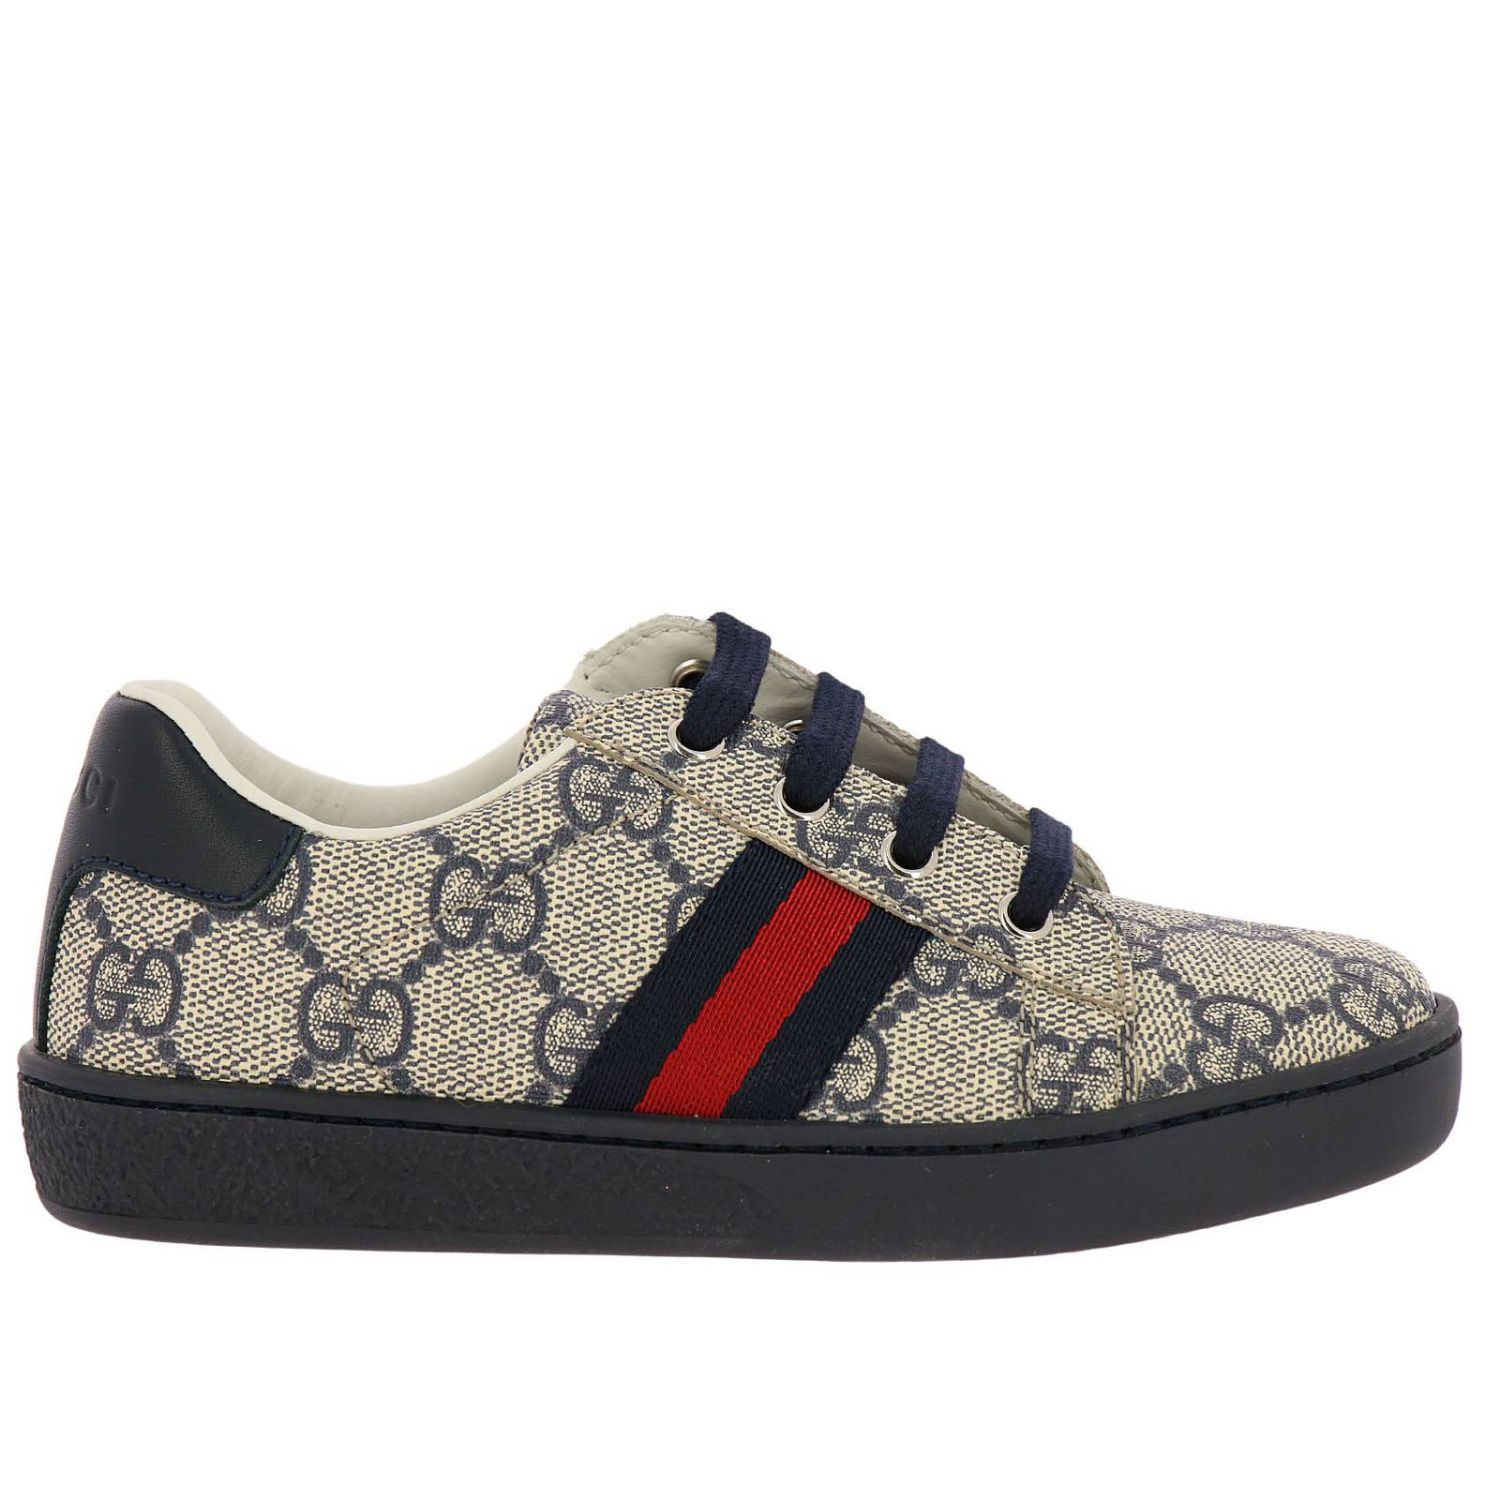 New Ace sneakers in leather with GG Supreme Gucci print and web bands